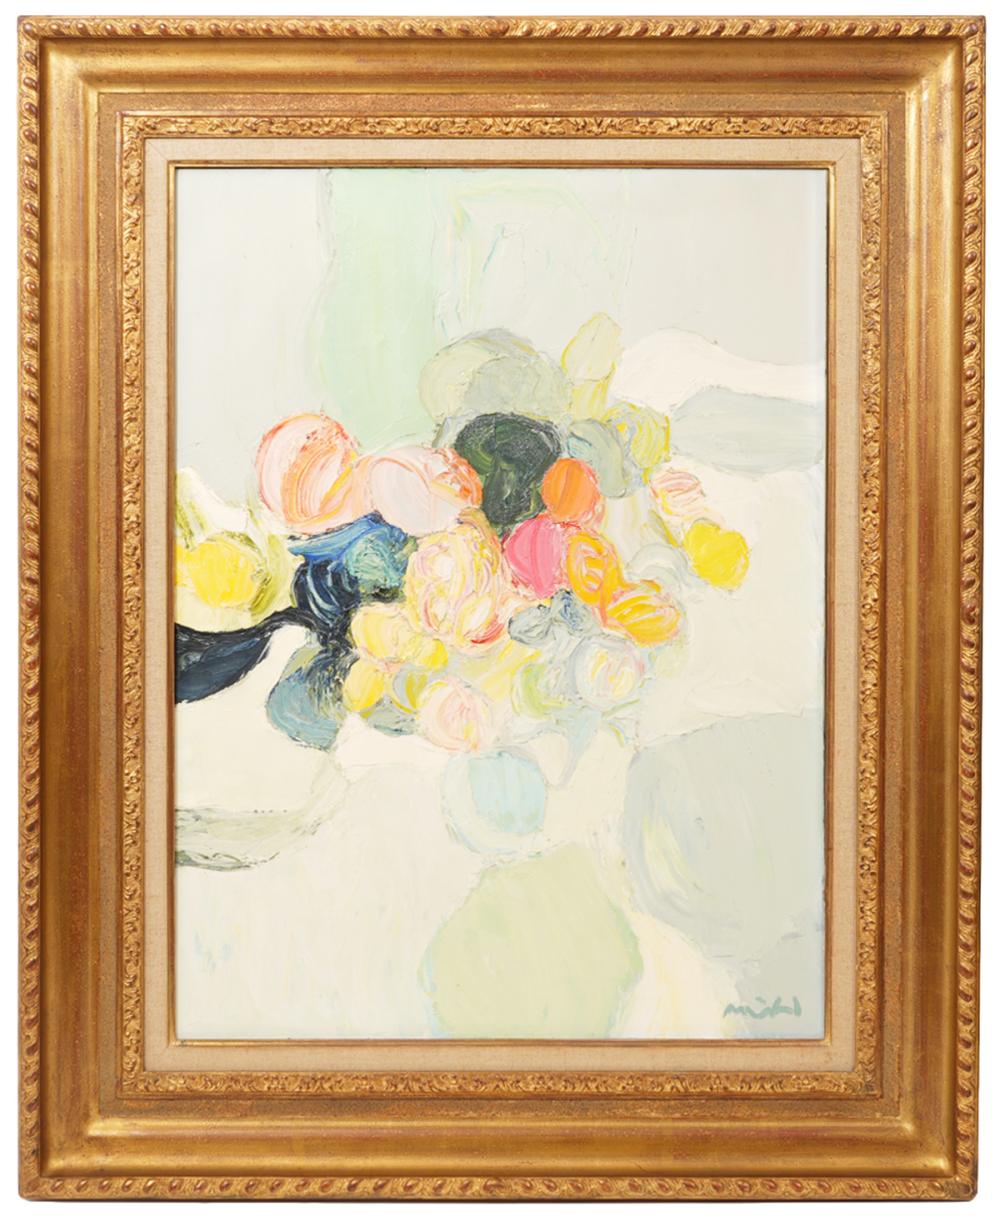 ROGER MUHL 'BOUQUET' OIL PAINTING